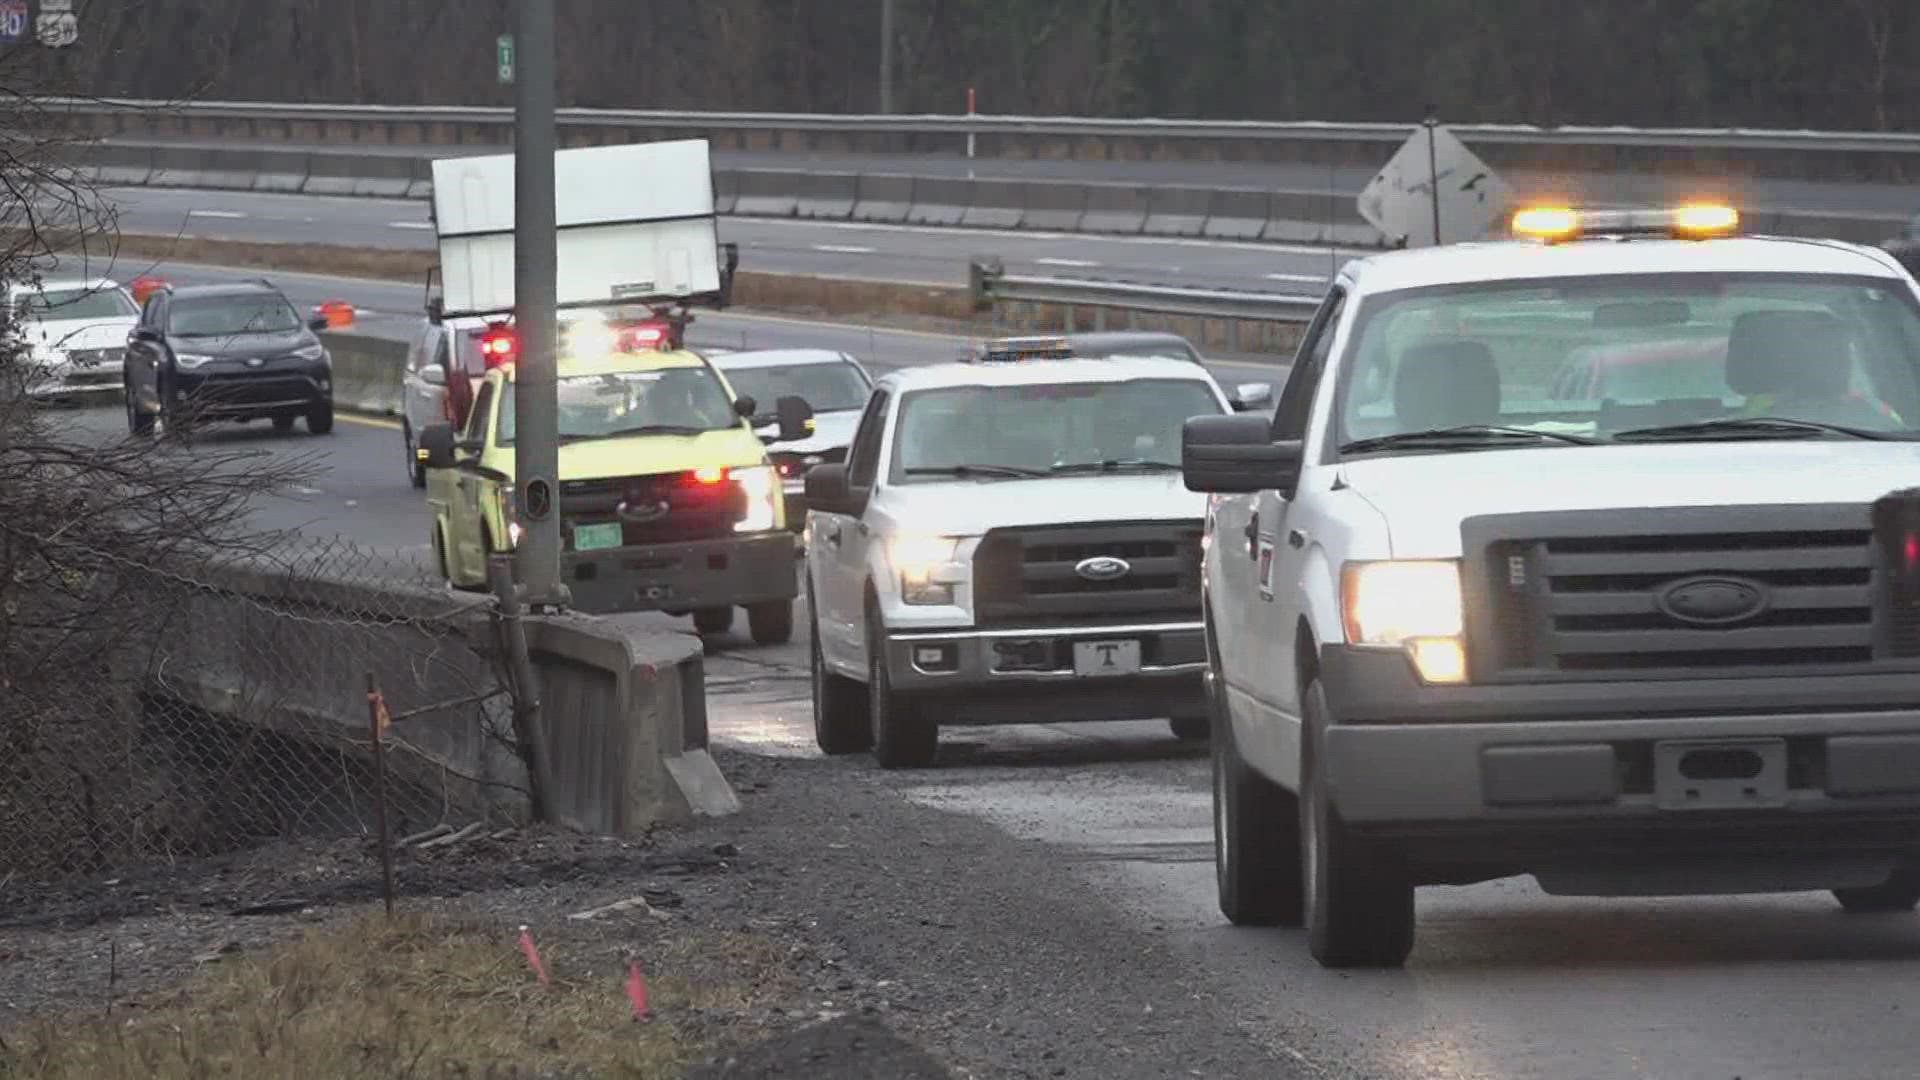 Drivers need to be alert on I-640 for crews that are working to patch potholes in both east and westbound lanes. TDOT crews have been fixing roads throughout the day